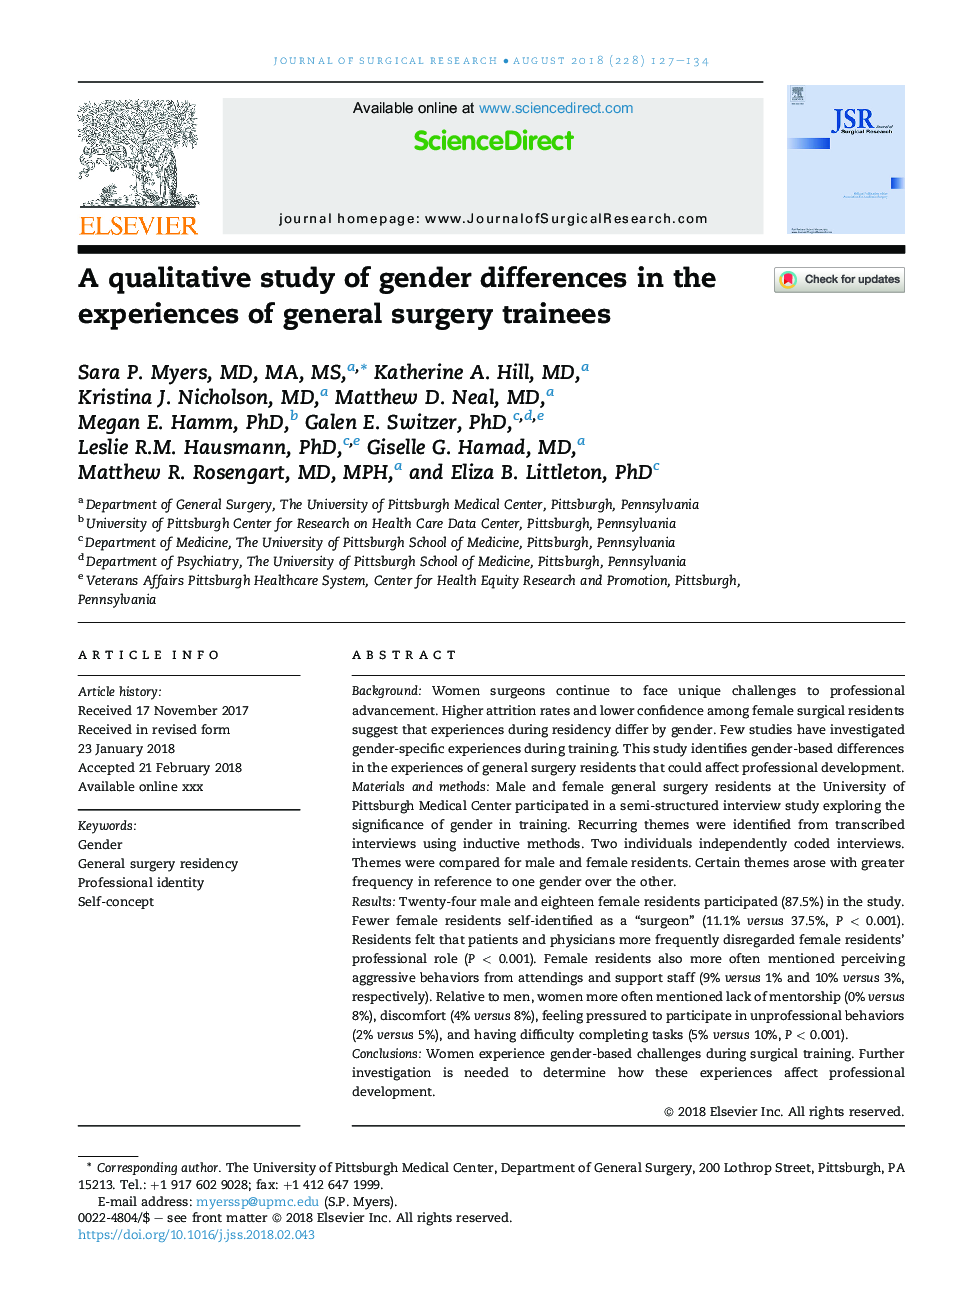 A qualitative study of gender differences in the experiences of general surgery trainees